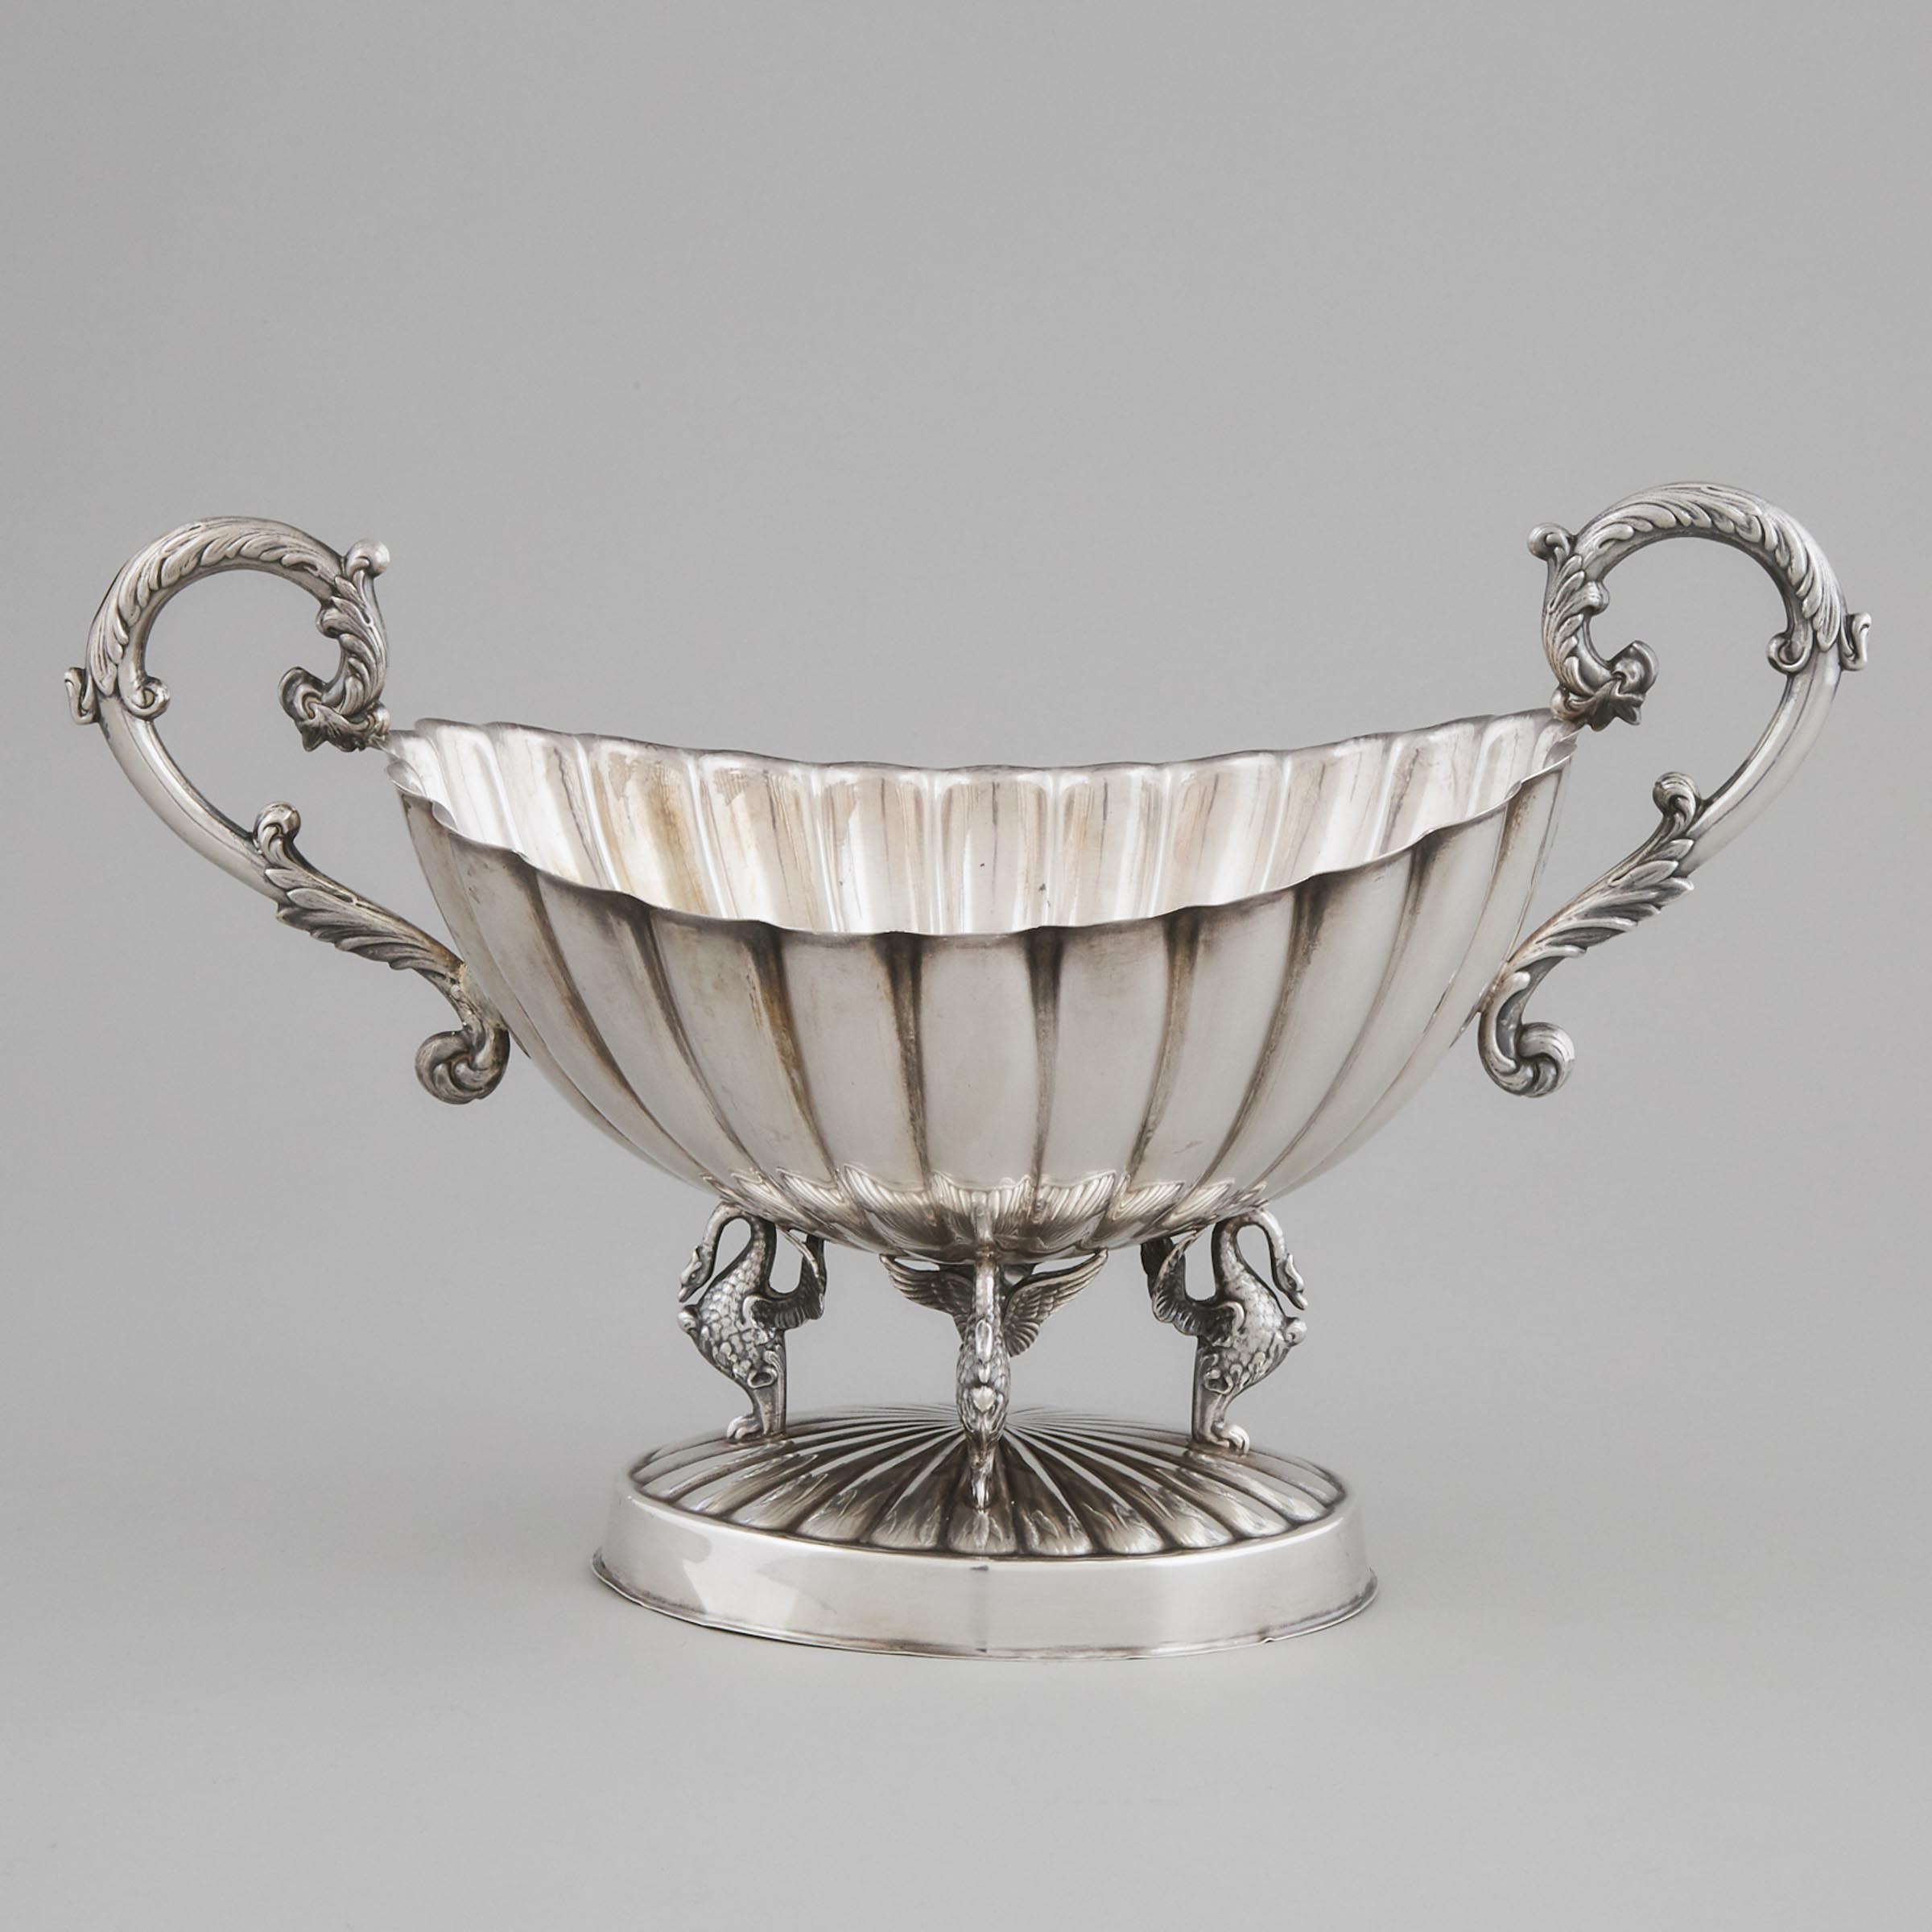 Continental Silver Two-Handled Oval Footed Bowl, 20th century